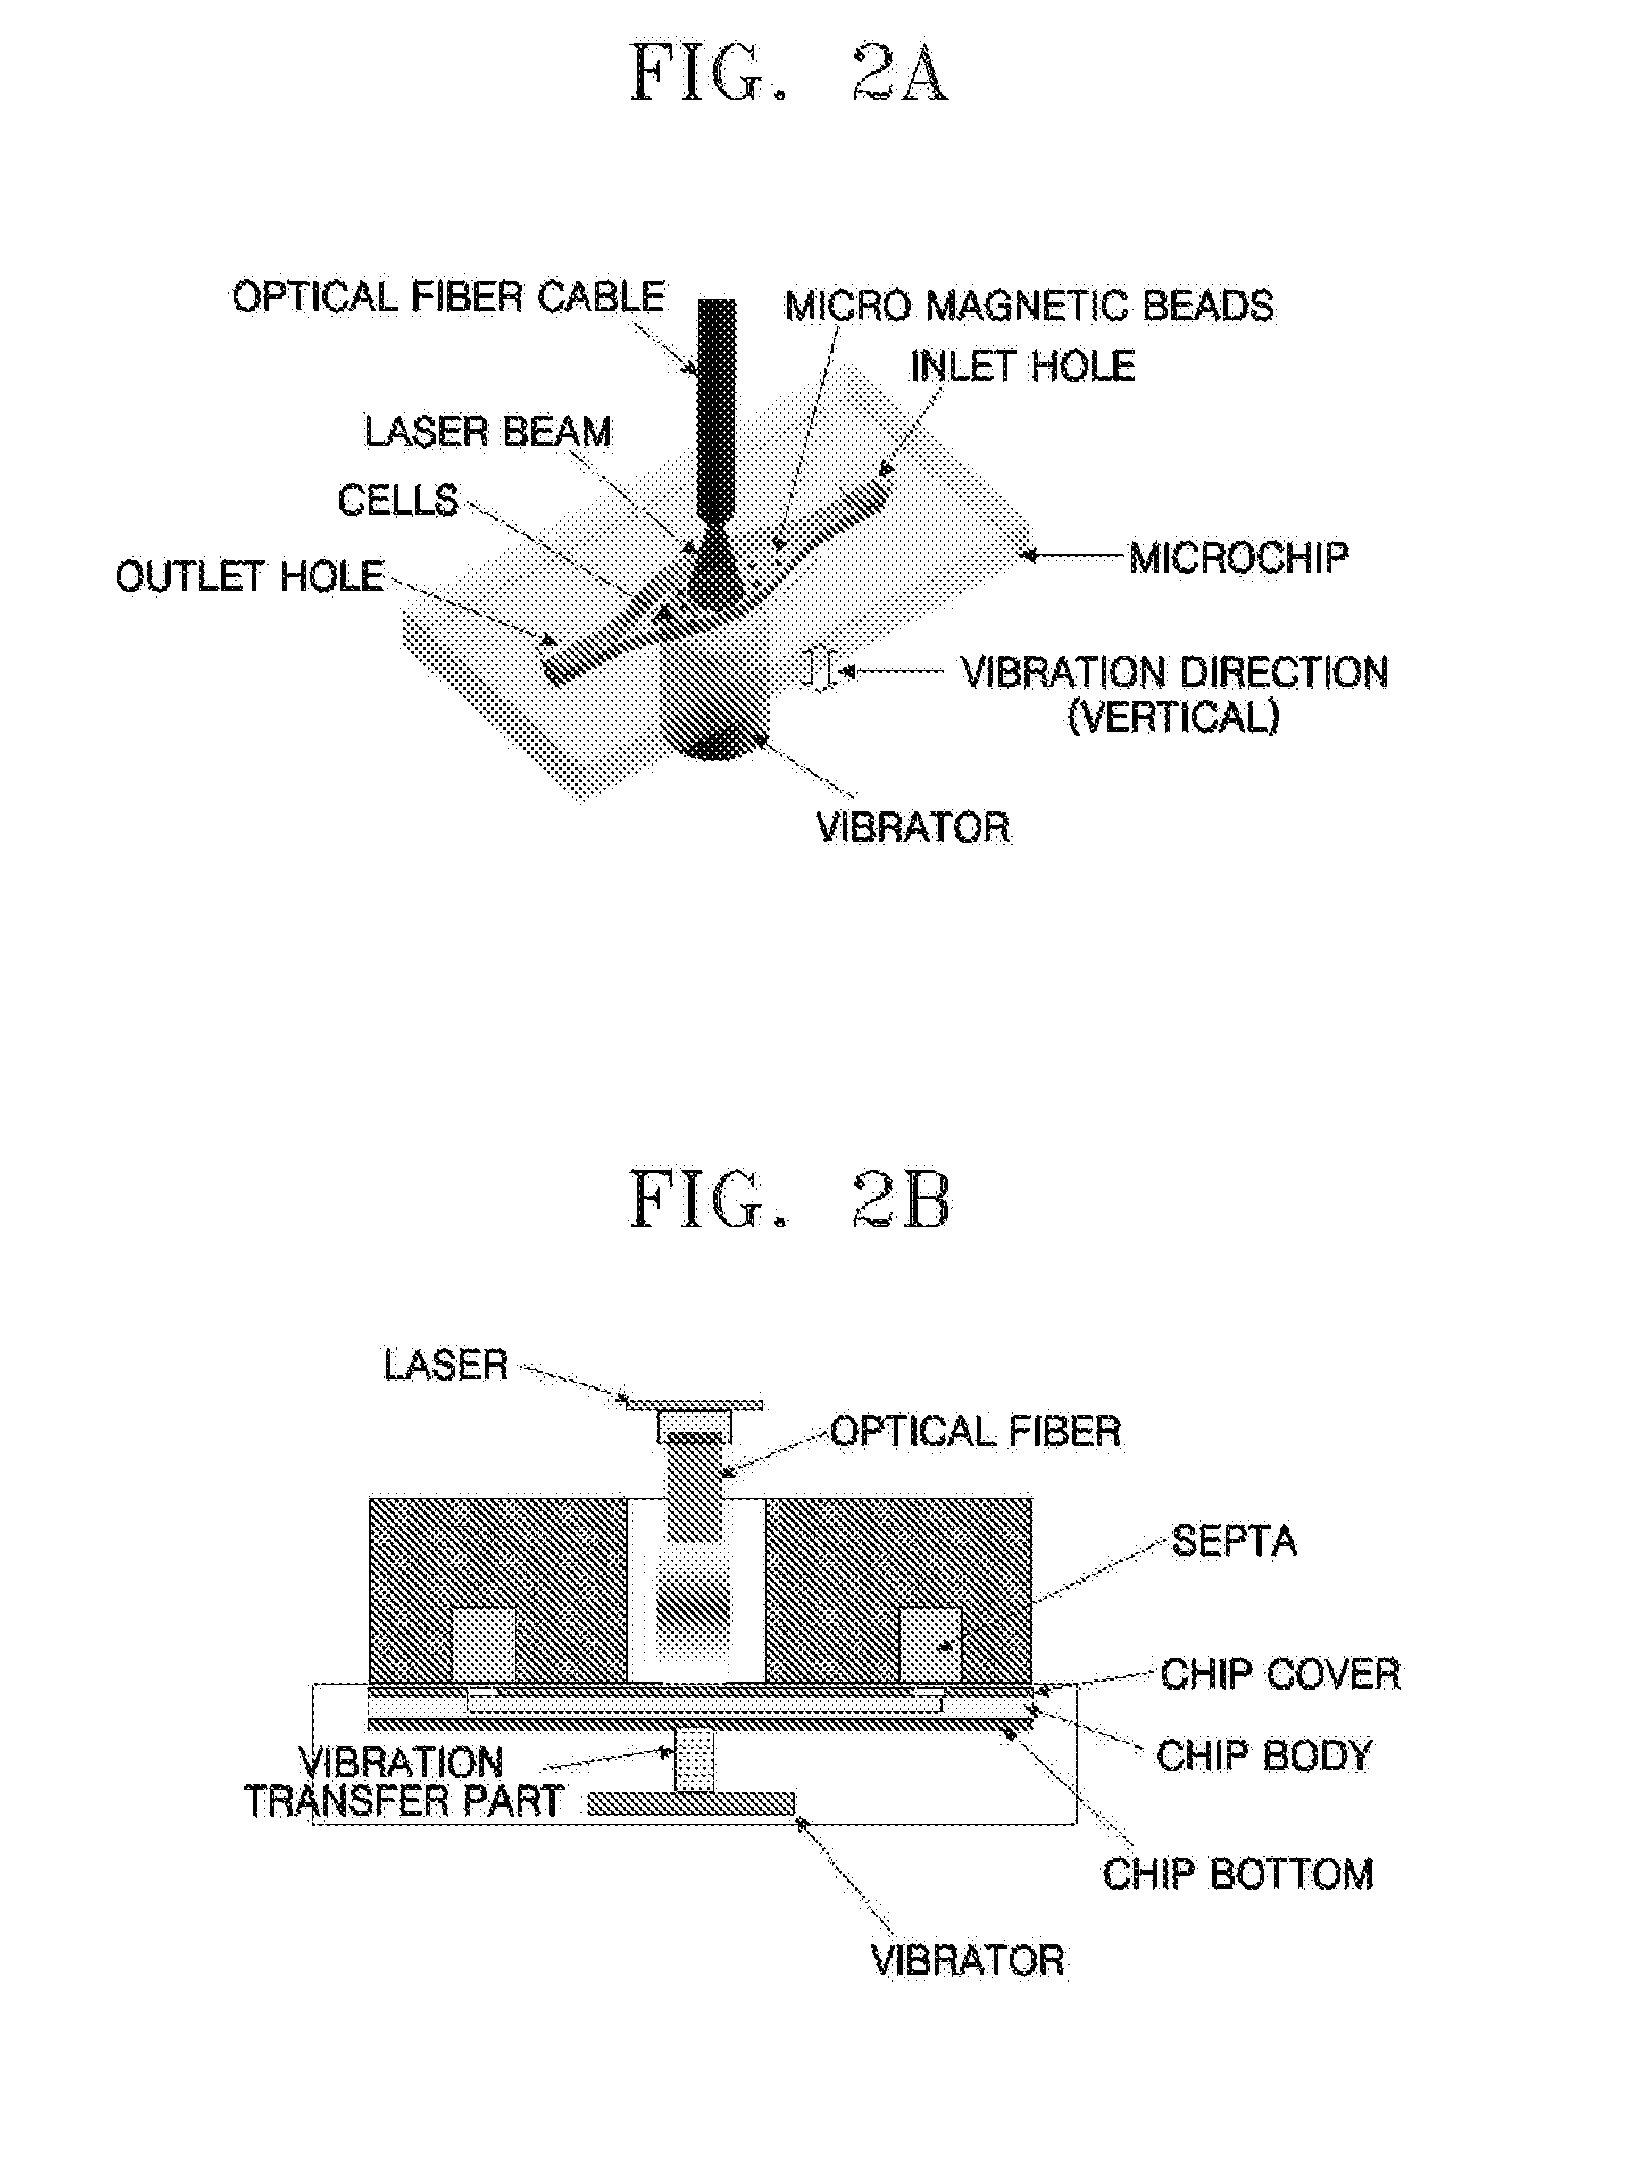 Method and apparatus for the rapid disruption of cells or viruses using micro beads and laser